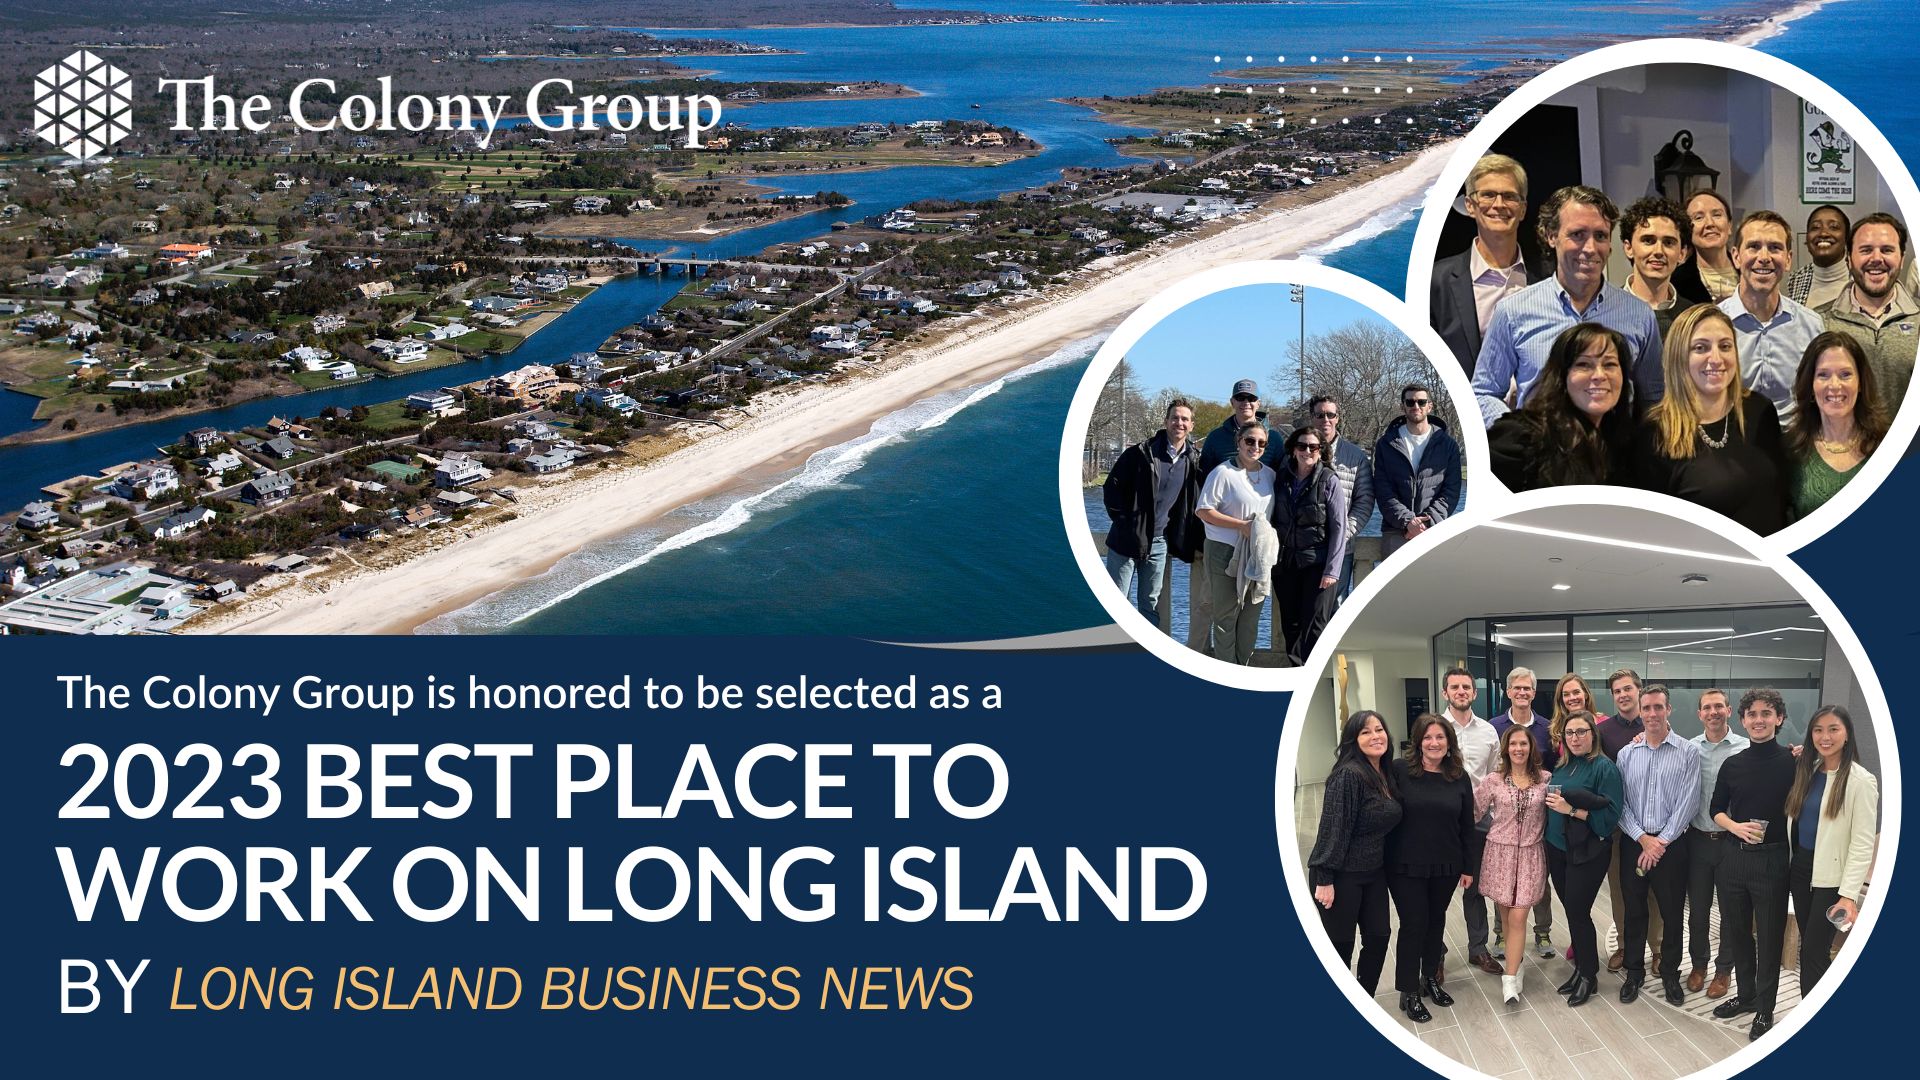 Long Island Business News Recognizes The Colony Group as a Best Place to Work on Long Island 2023